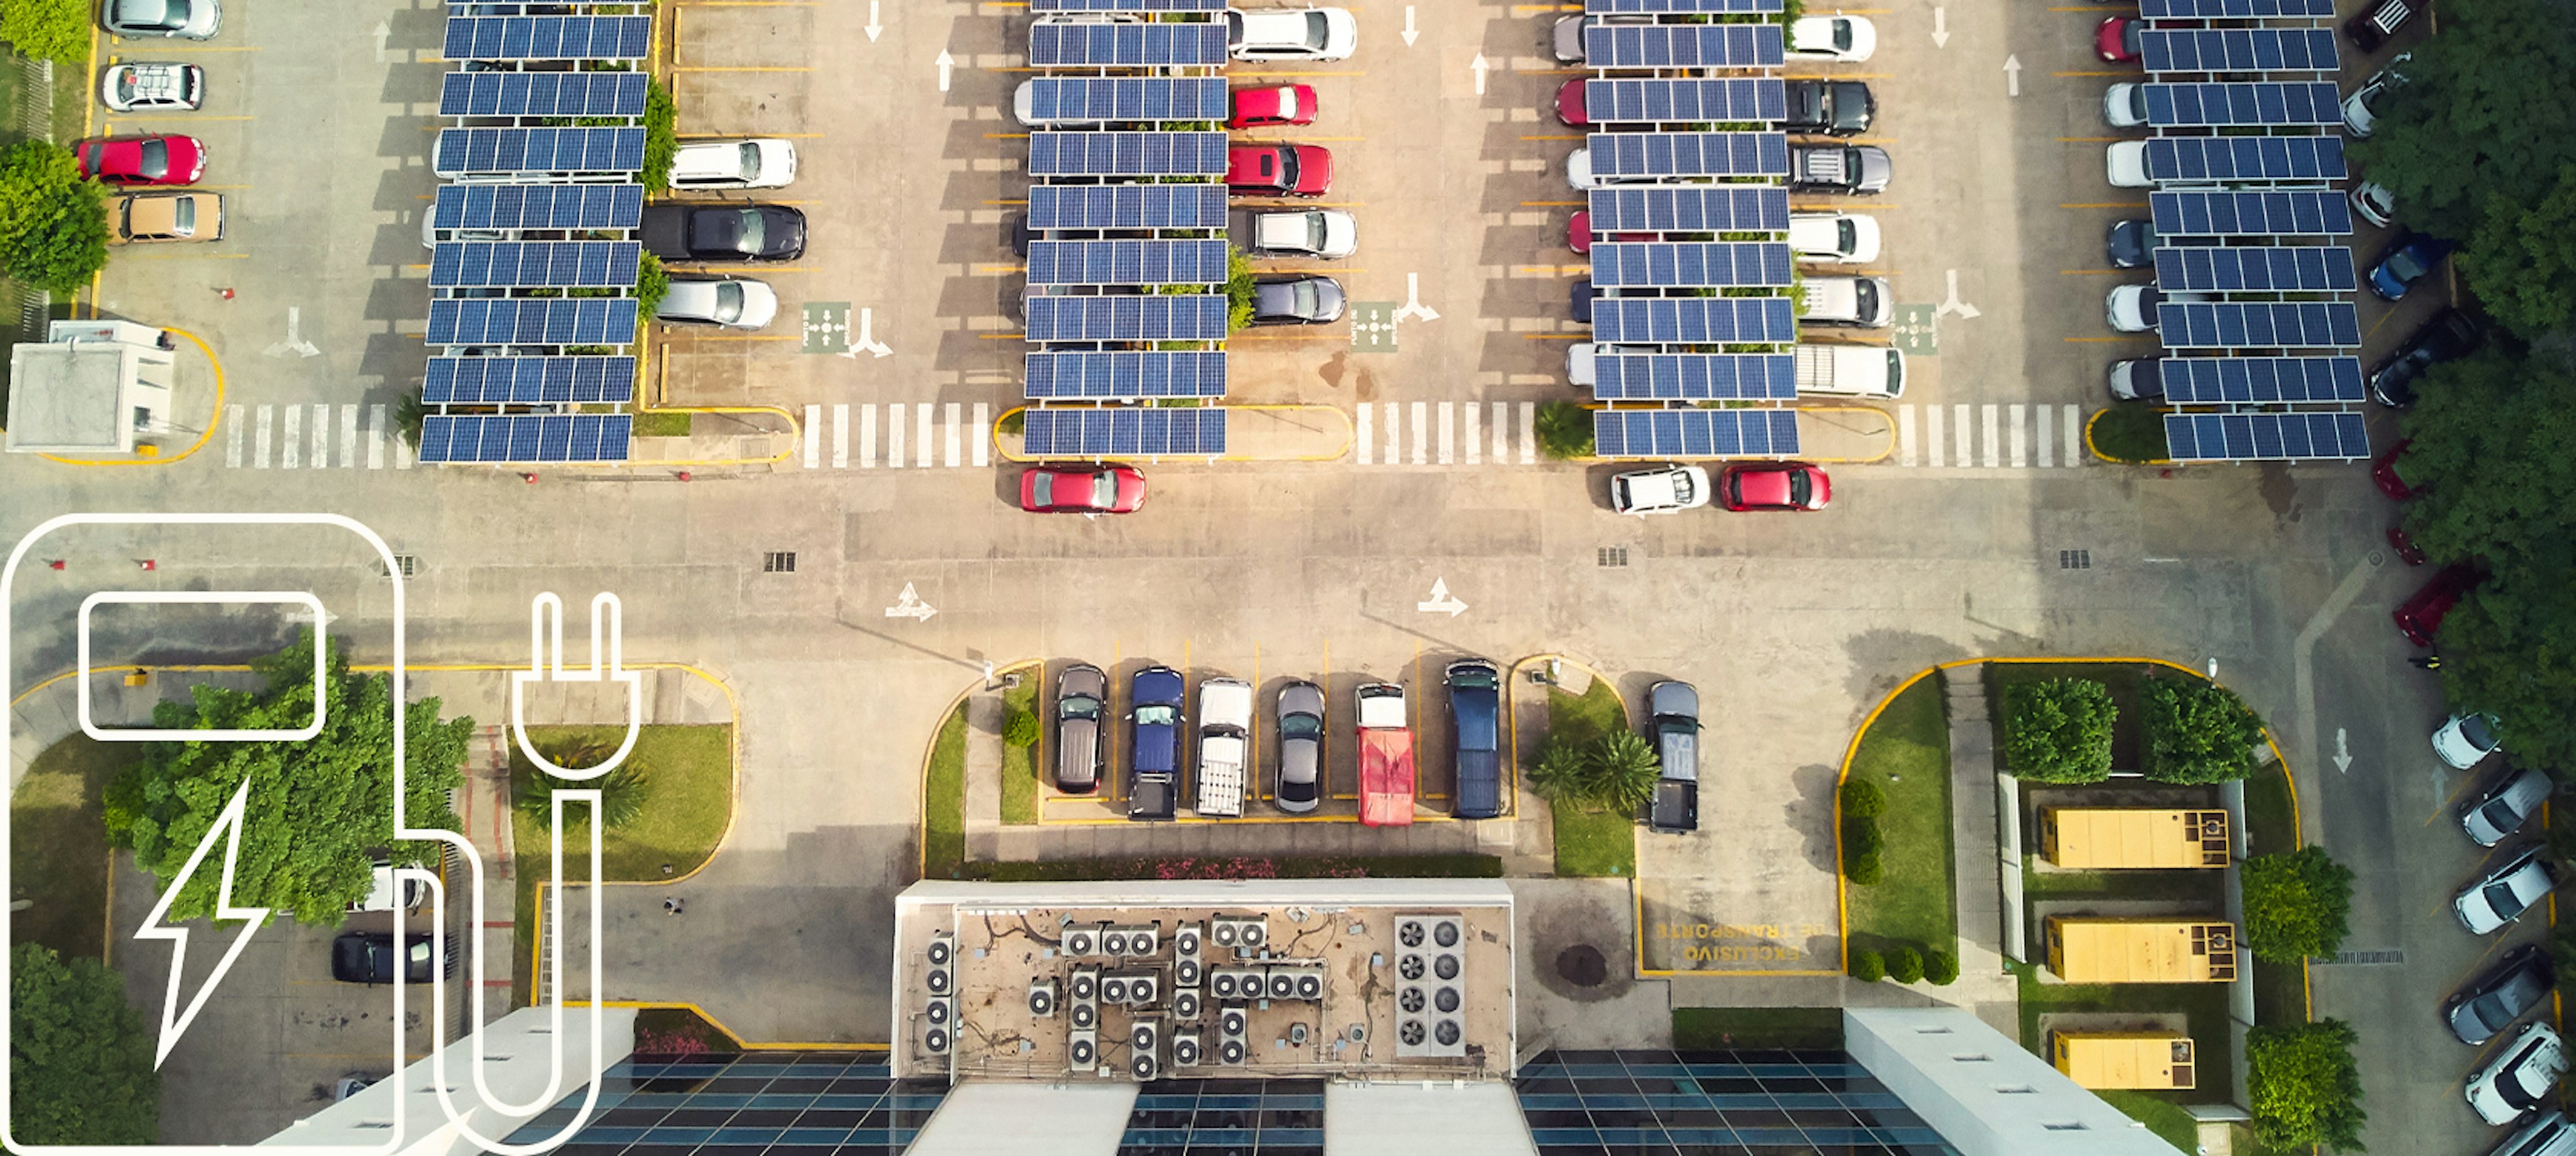 View of solar powered ev charging station from above